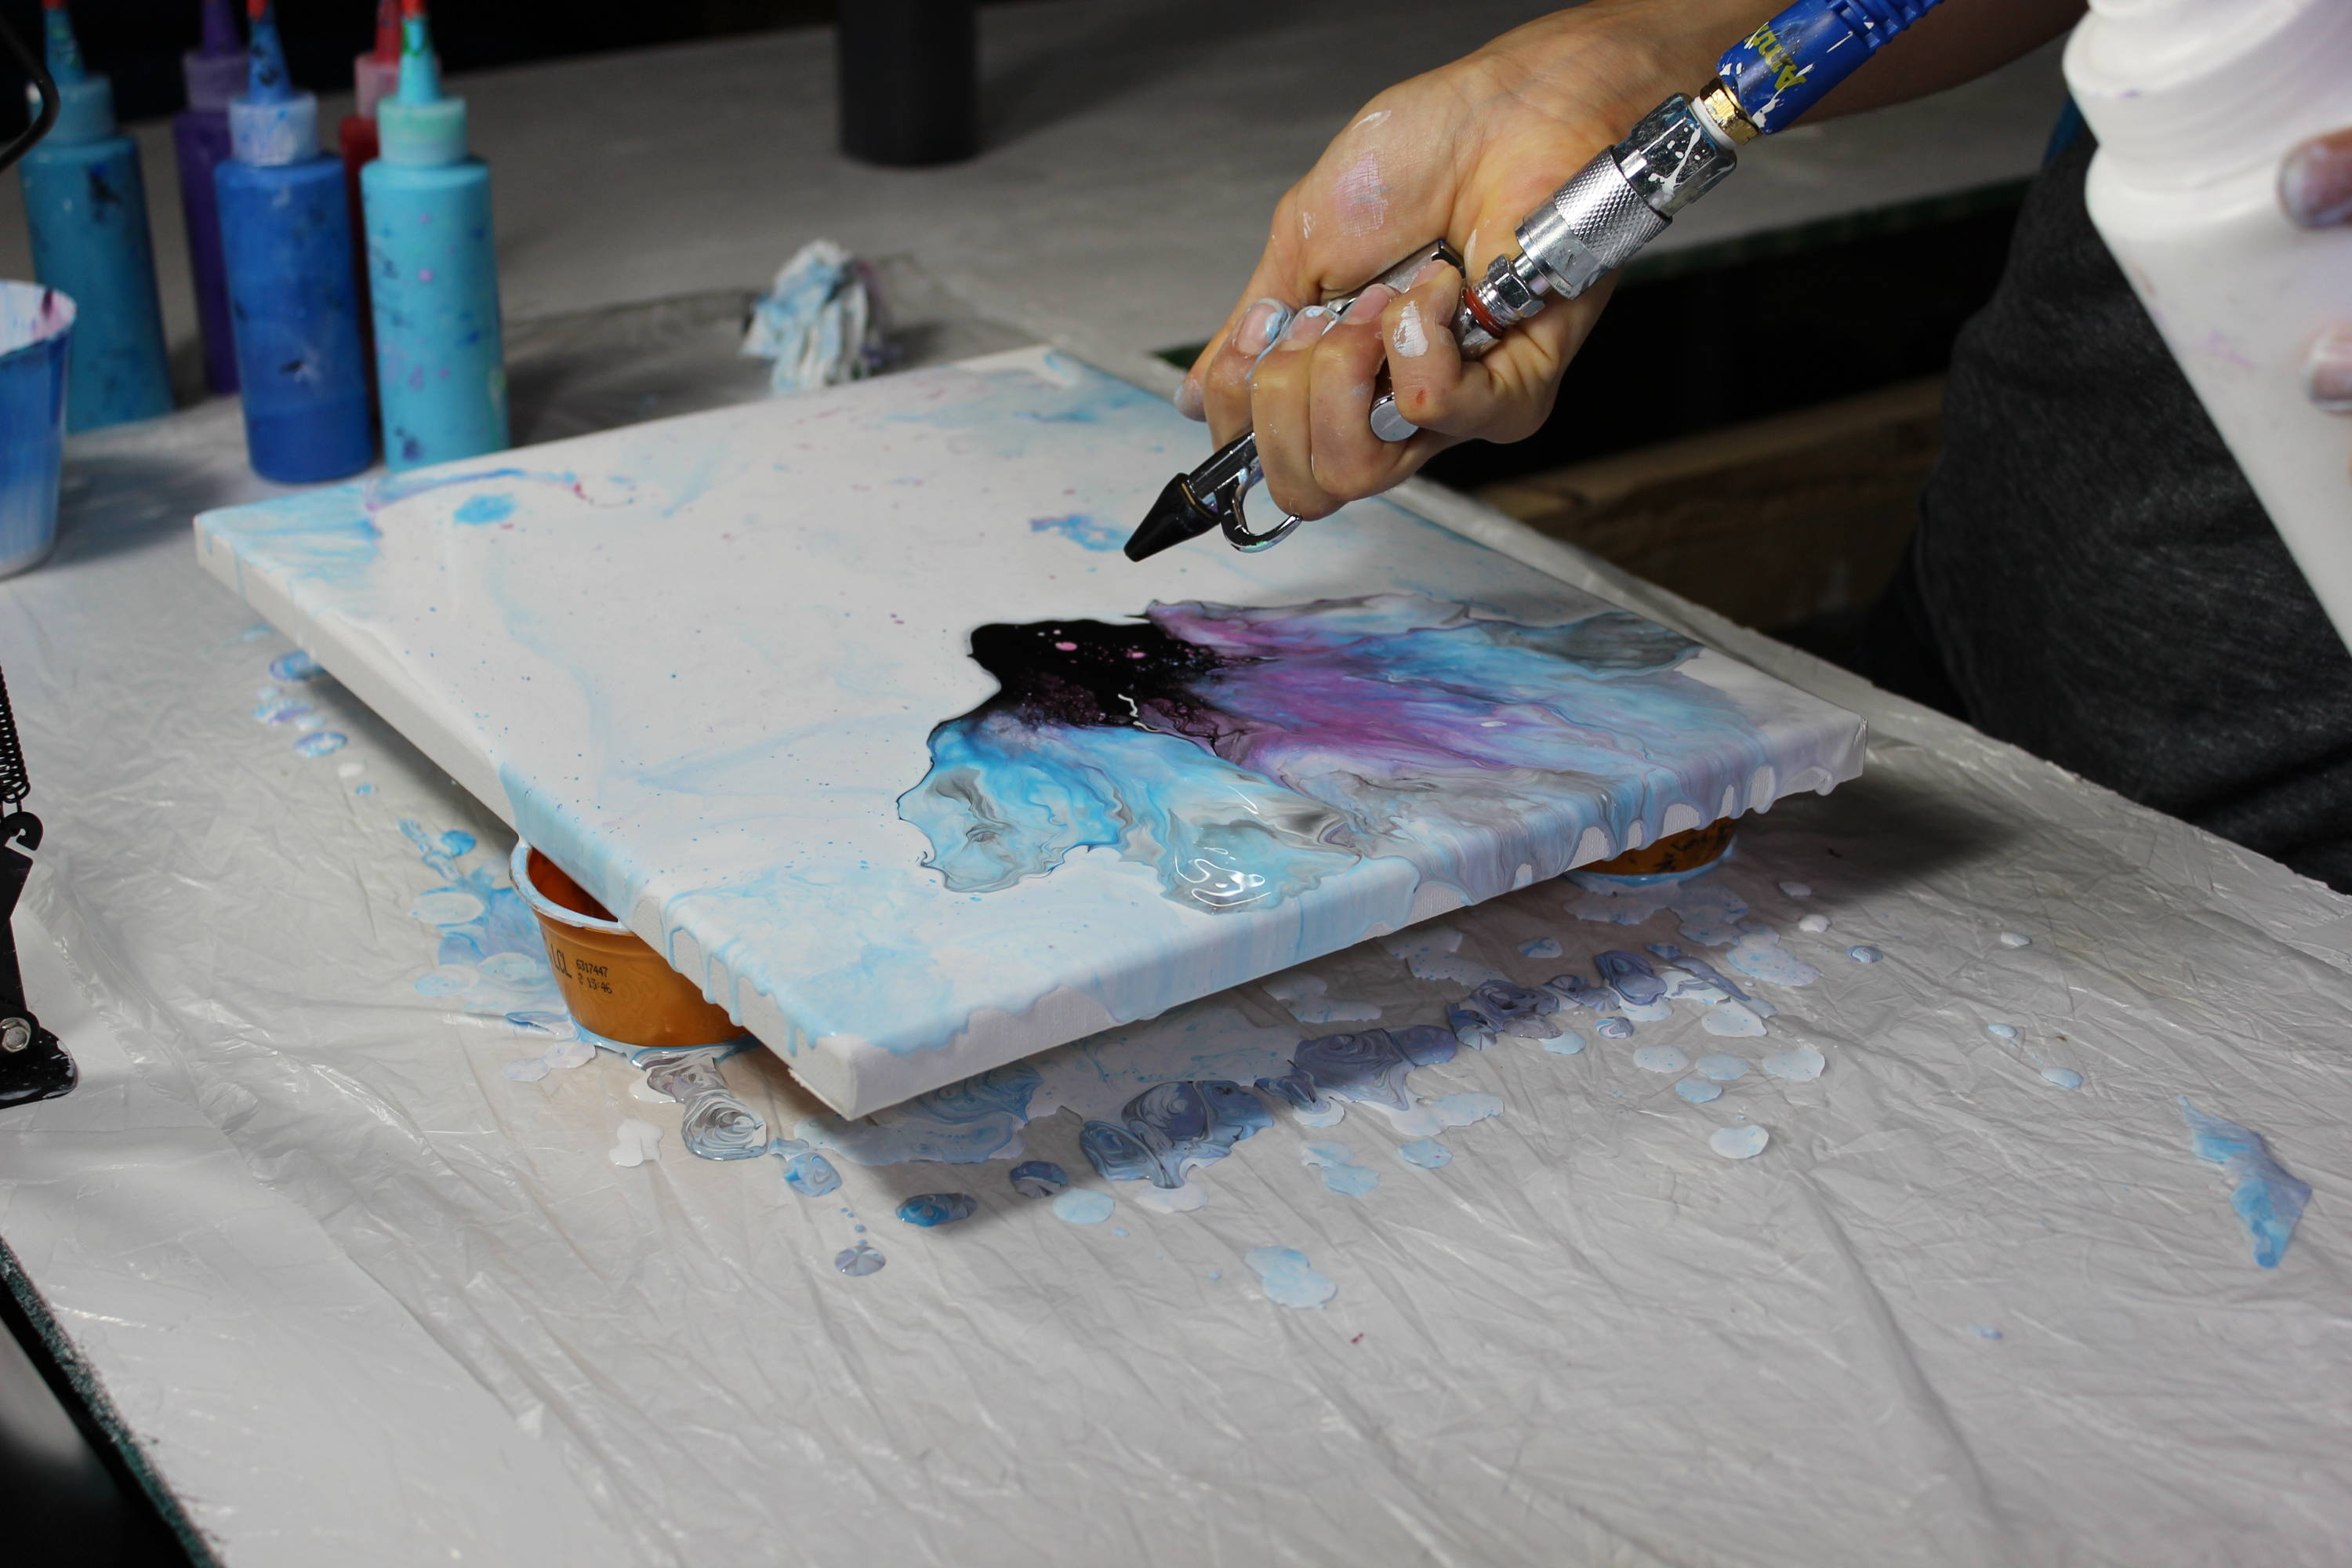 Creating Messy Ever After painting on a canvas